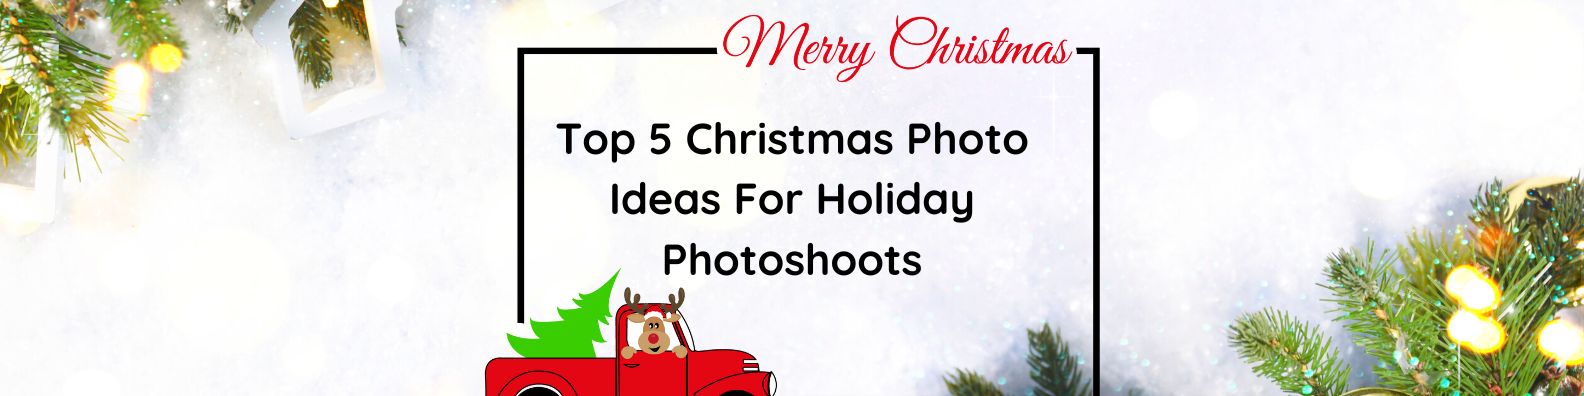 Top 5 Christmas Photo Ideas For Holiday Photoshoots